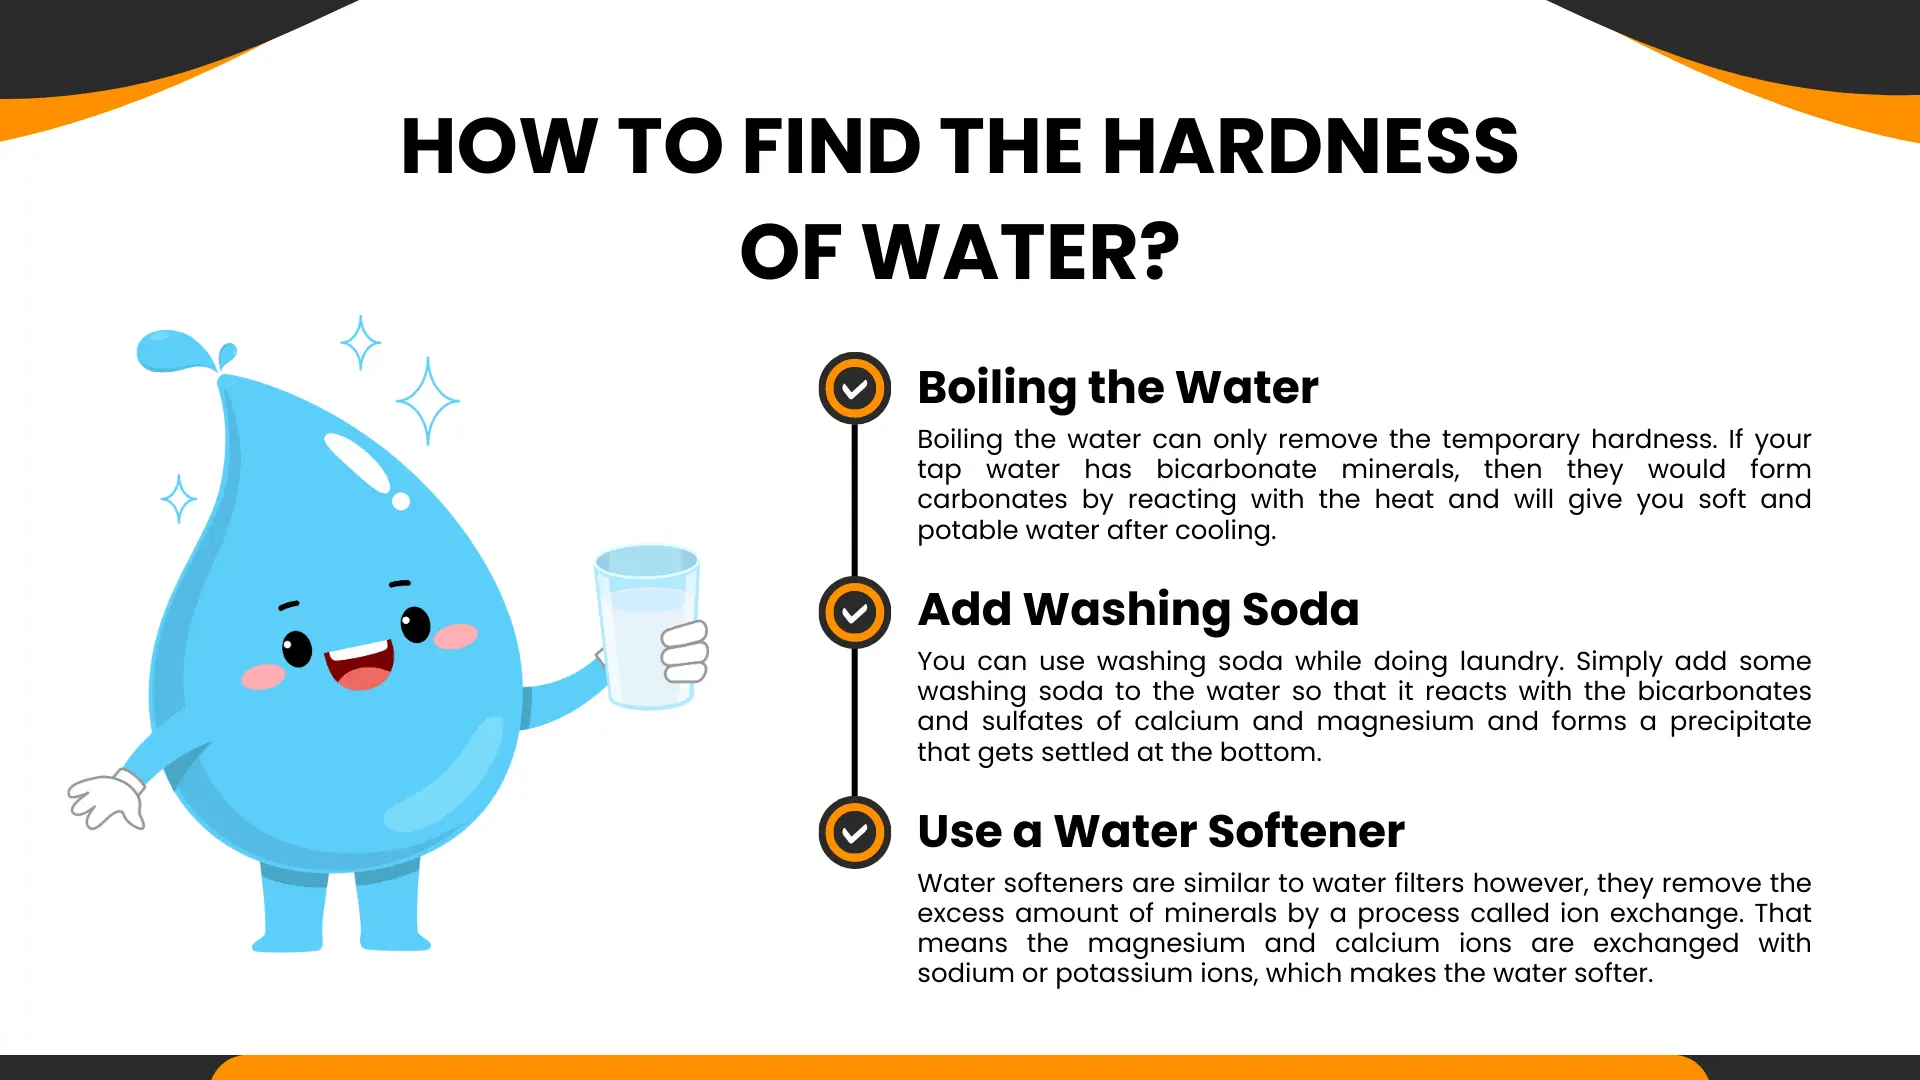 How to Find the Hardness of Water